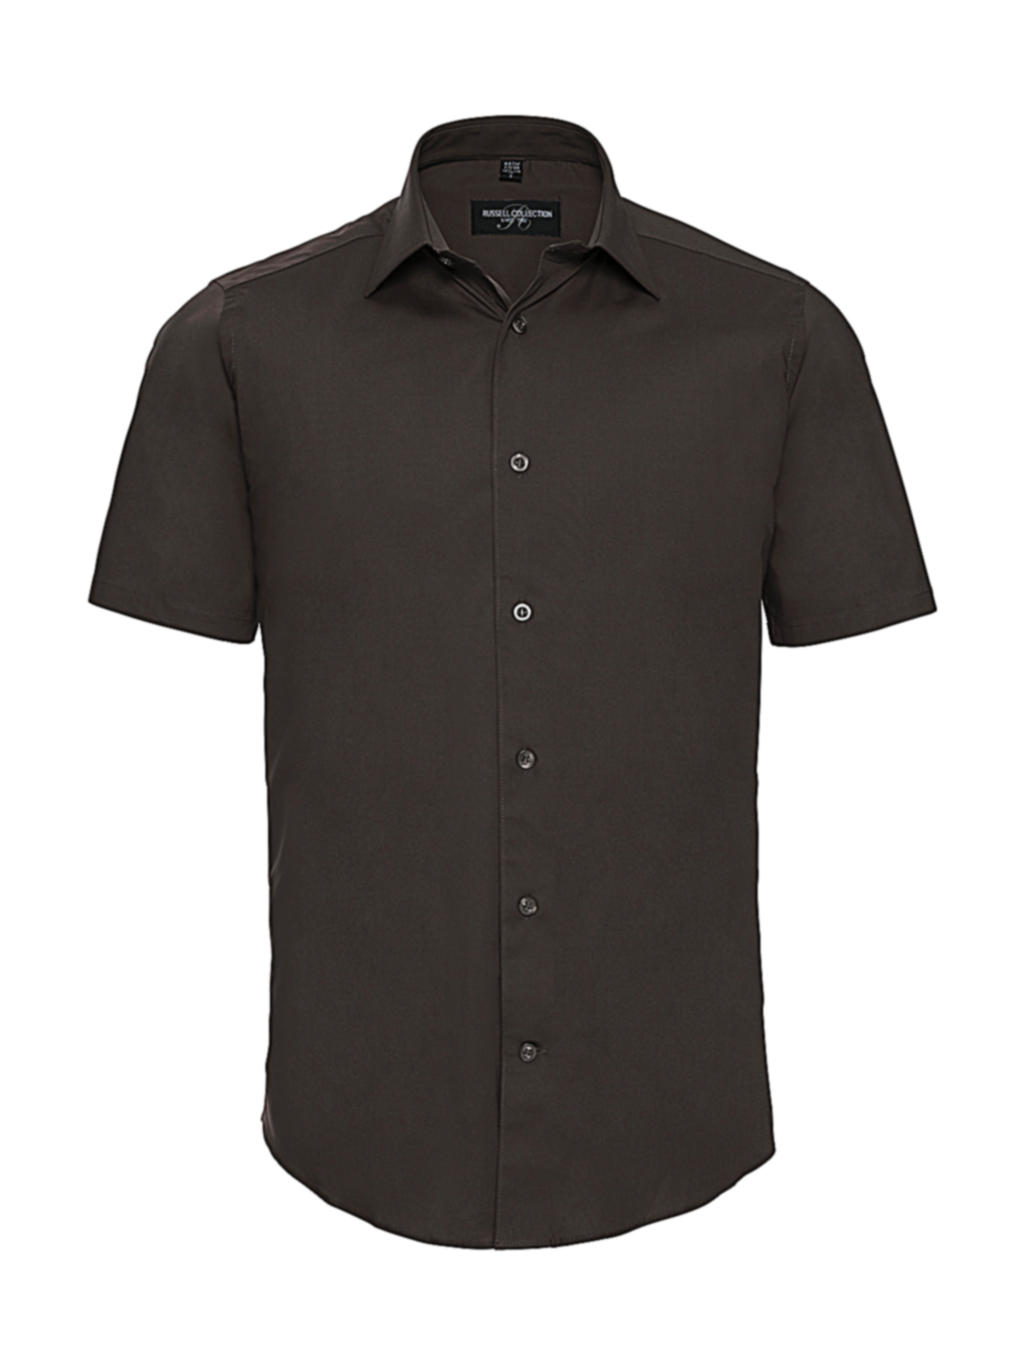  Fitted Stretch Shirt in Farbe Chocolate